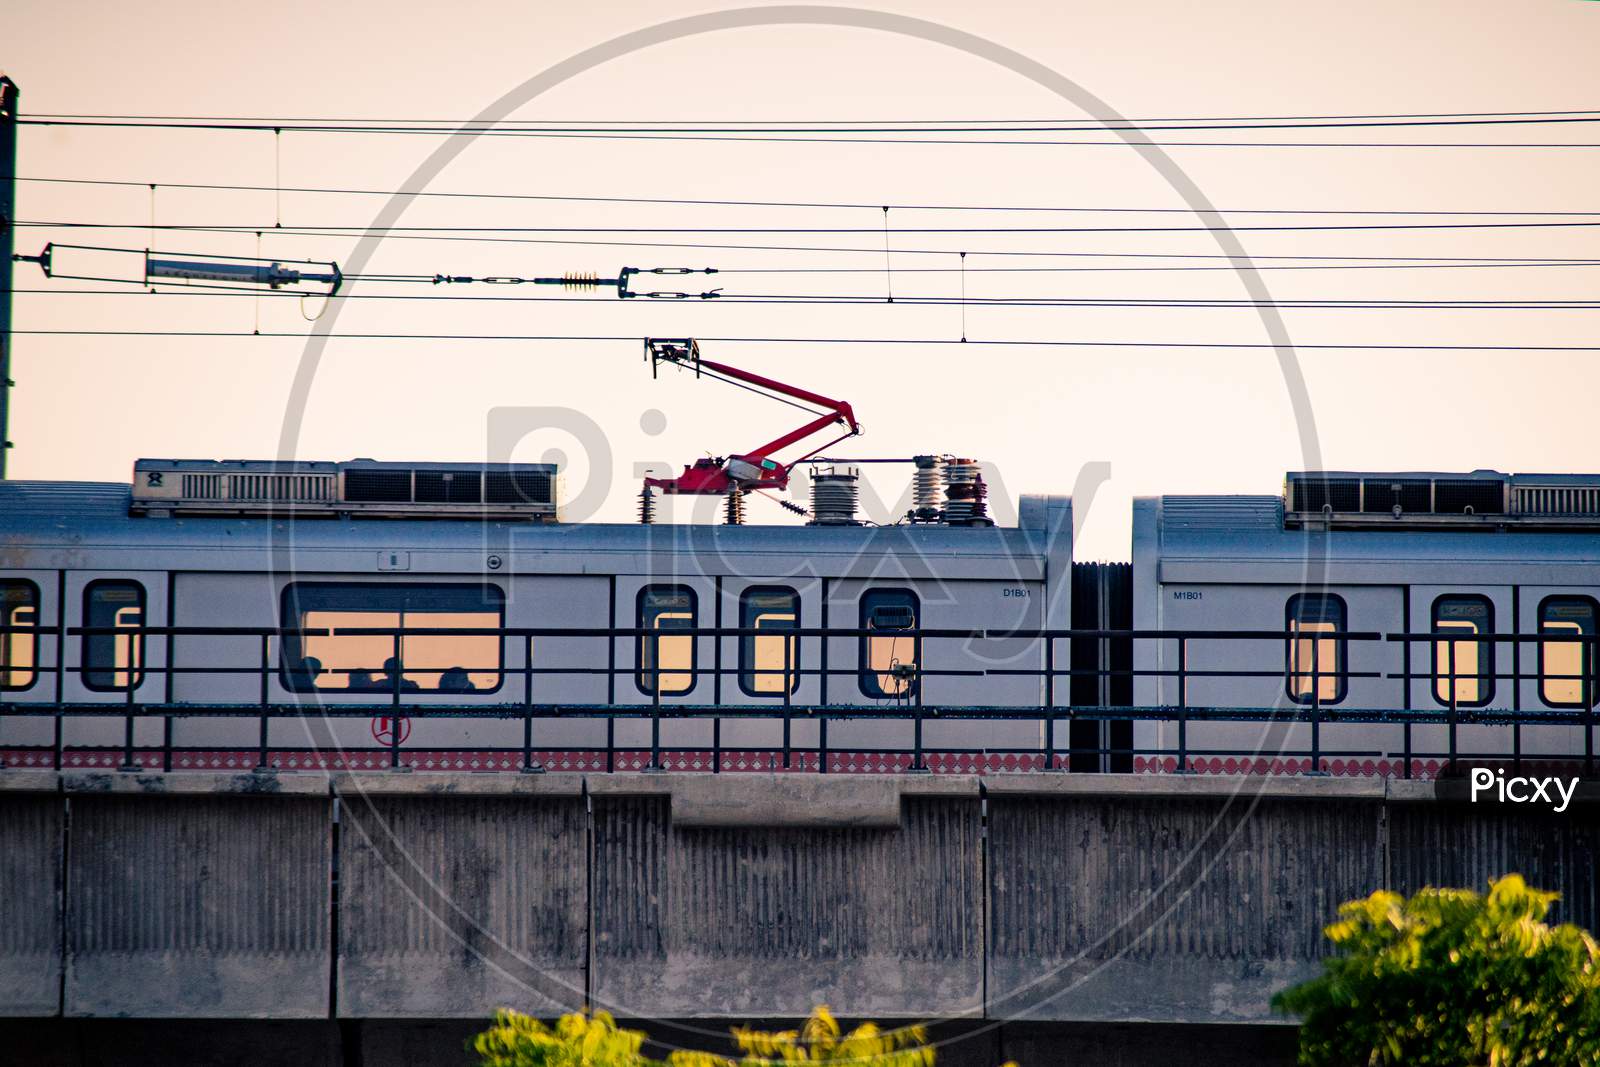 Aerial Dusk Shots Of Metro Train On Elevated Bridge With People Visible Through Transparent Windows And Wires And Support Visible